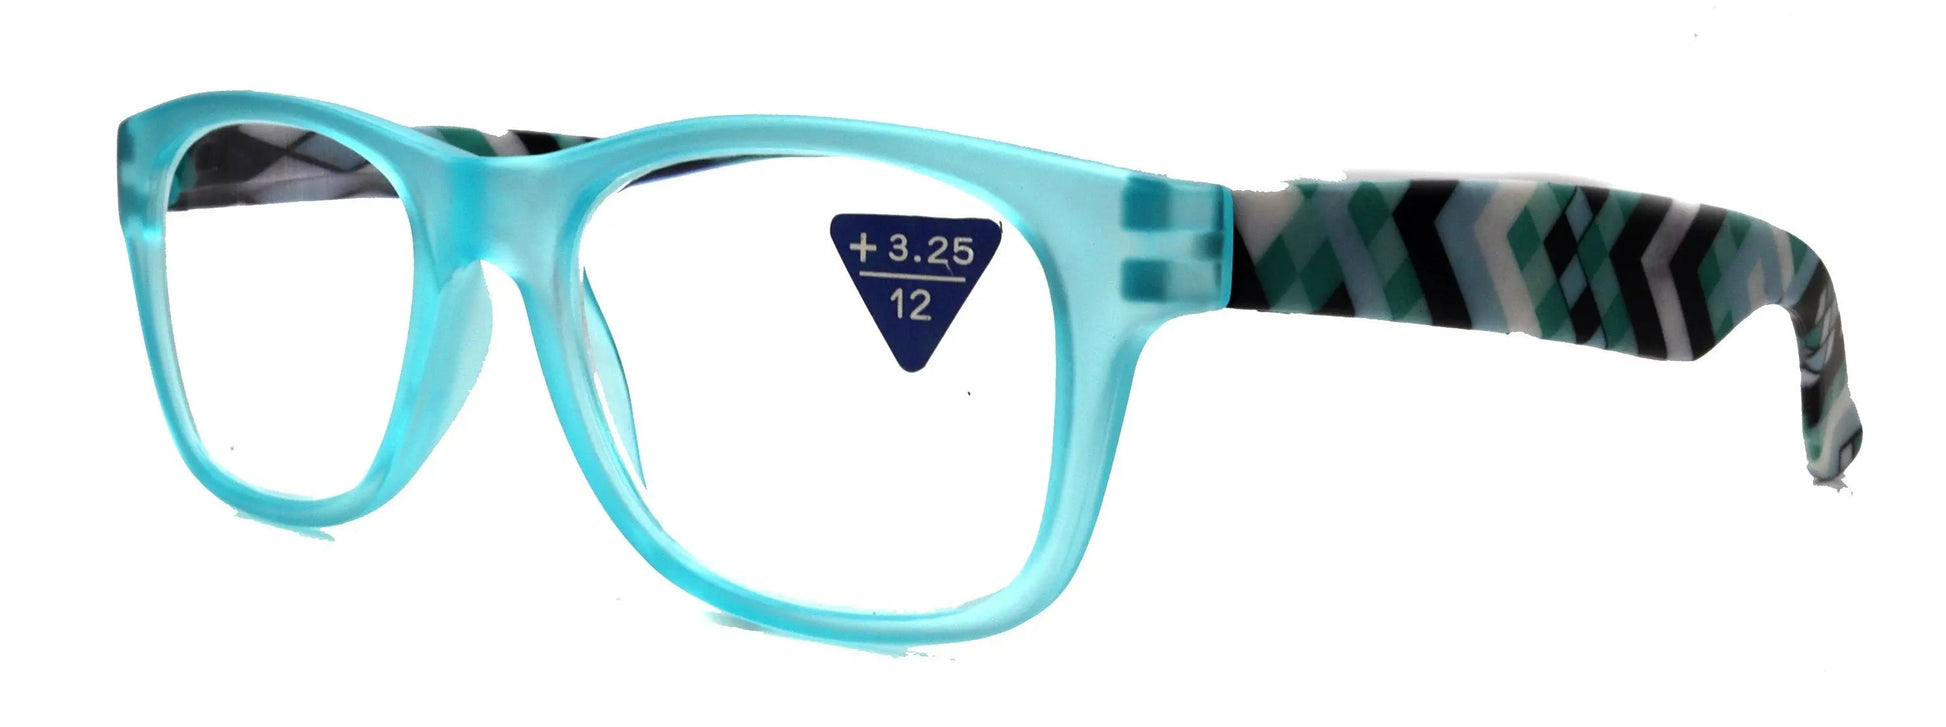 Monet, (Premium) Reading Glasses High End Readers +1 .. +3 Magnifying, Translucent (L Blue) Chevron Square. Optical Frame. NY Fifth Avenue.